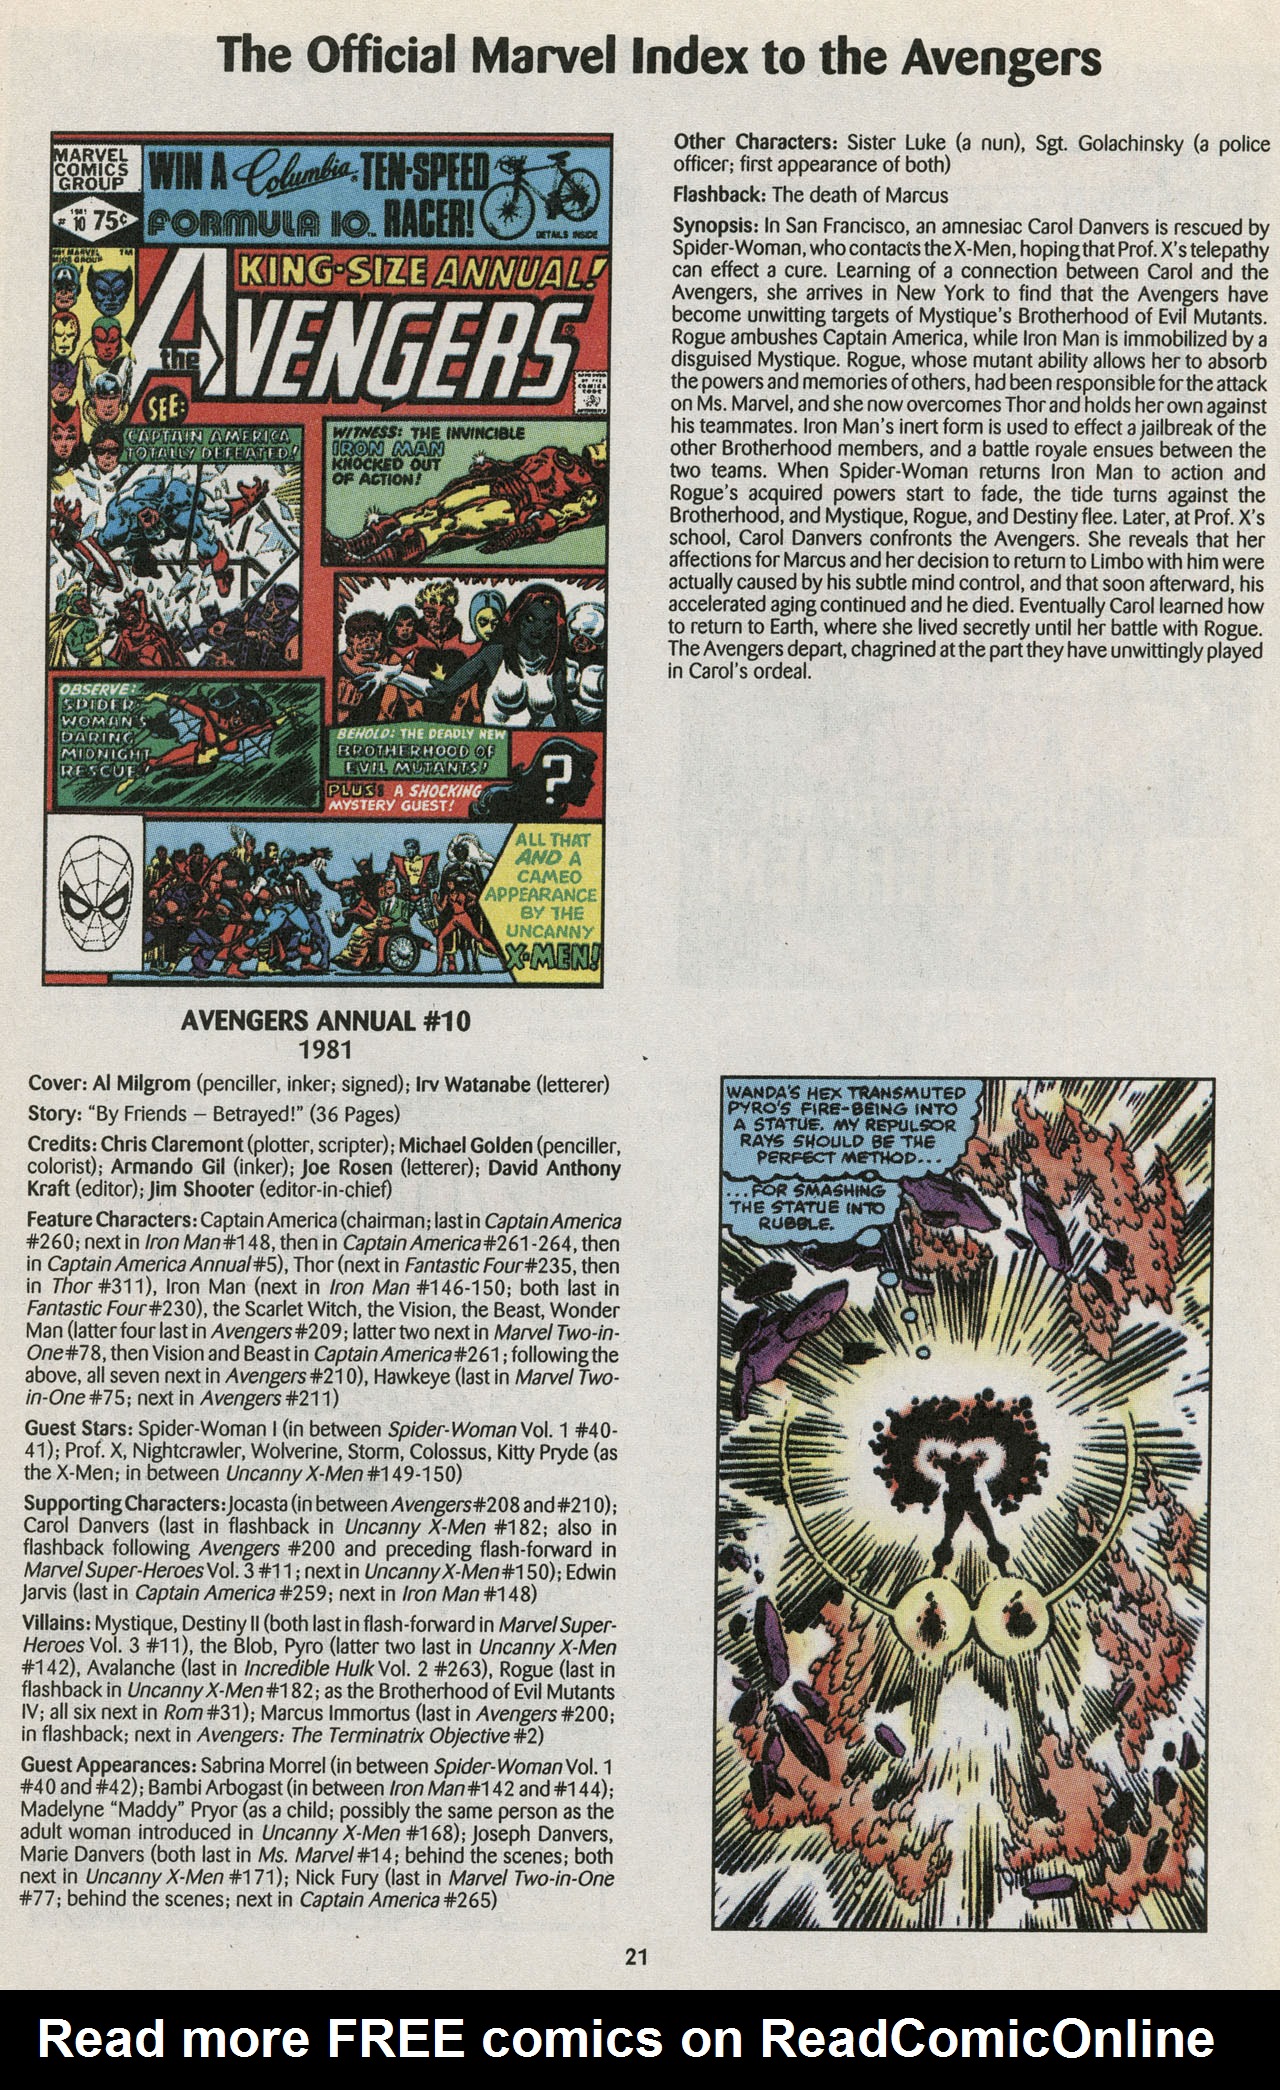 Read online The Official Marvel Index to the Avengers comic -  Issue #4 - 23